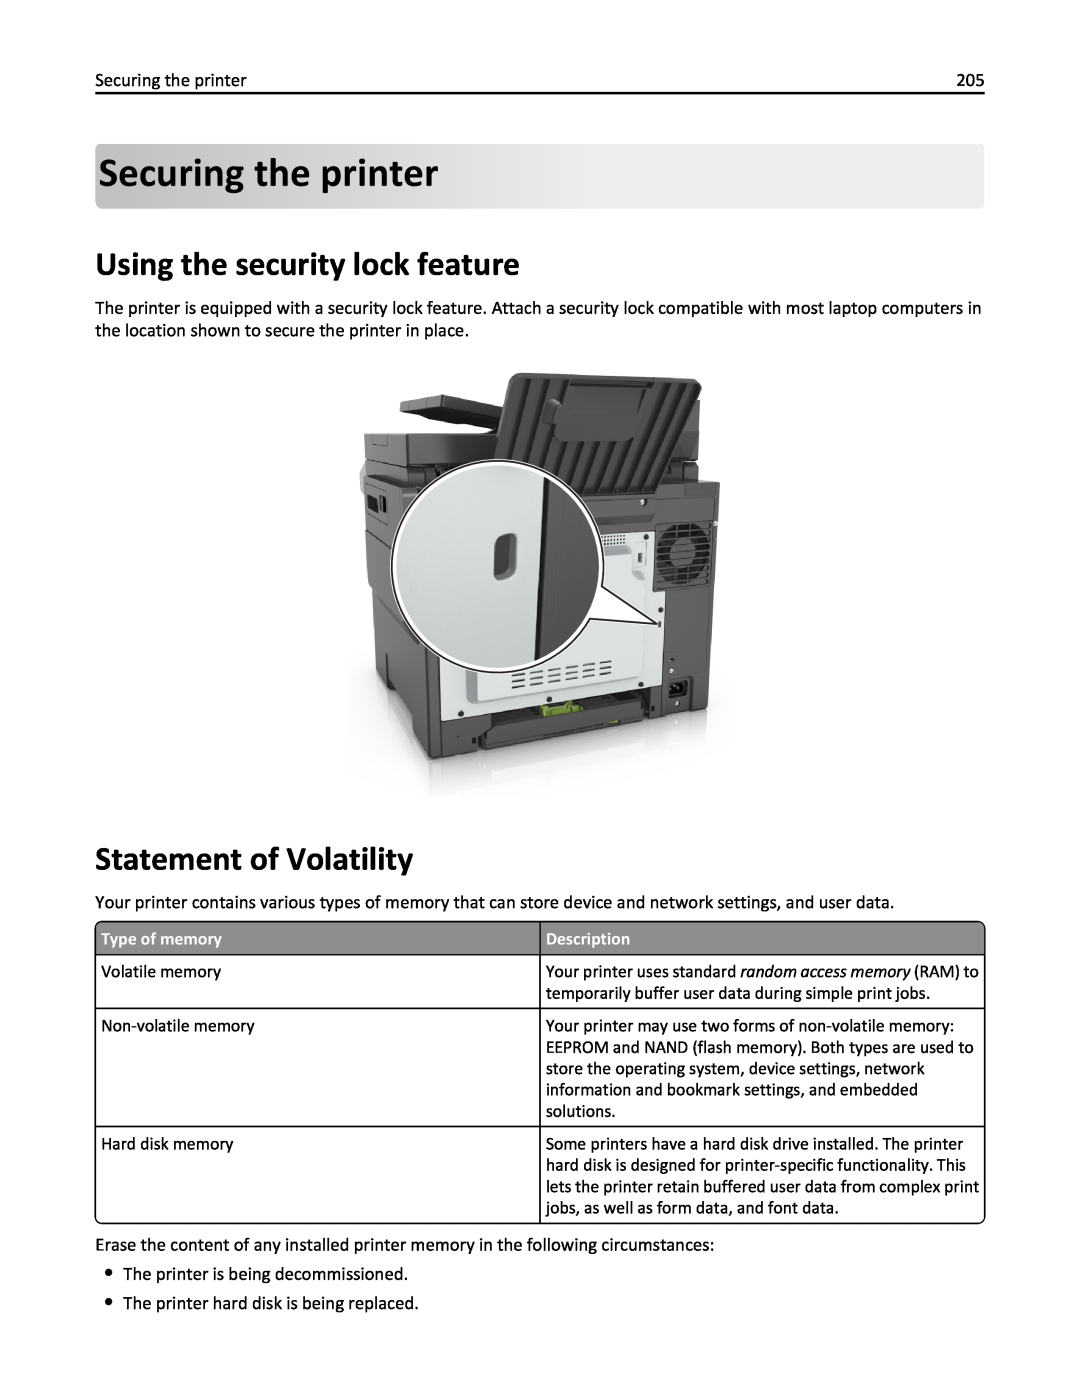 Lexmark 436 manual Securing theprinter, Using the security lock feature, Statement of Volatility 